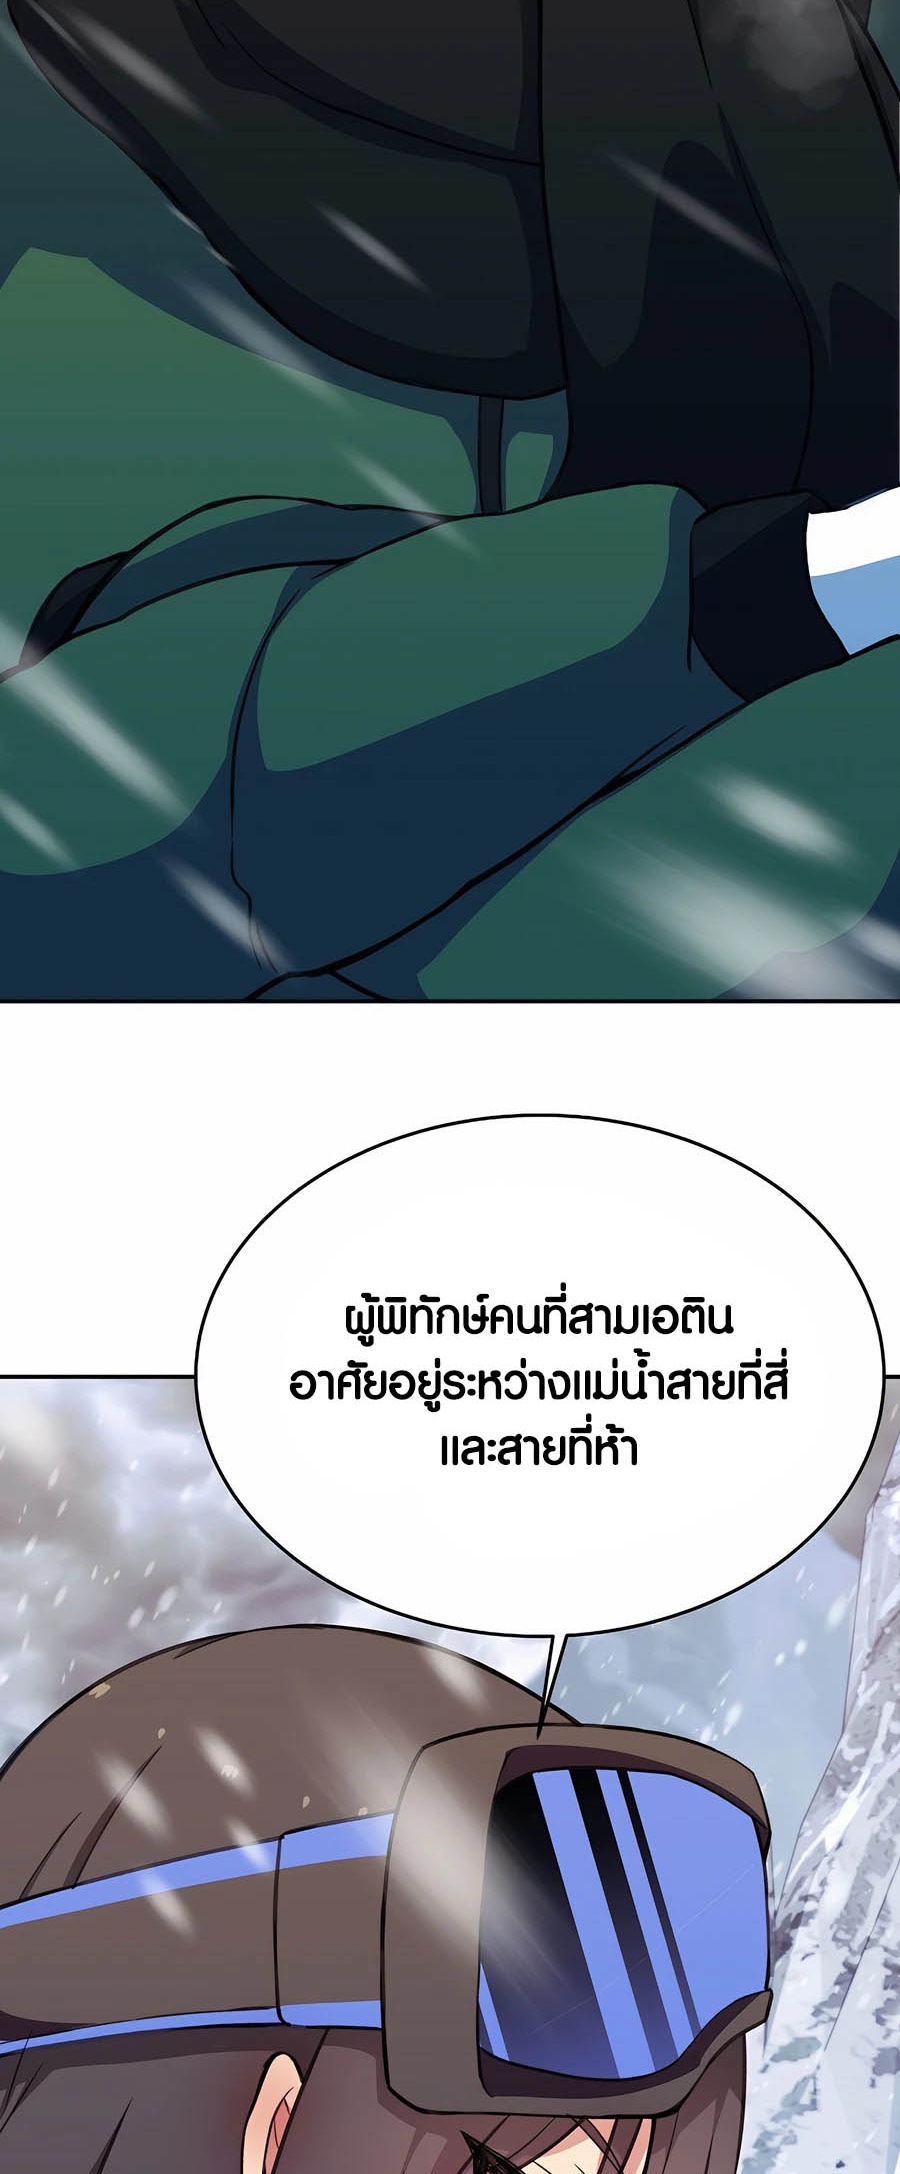 à¸­à¹ˆà¸²à¸™à¸¡à¸±à¸™à¸®à¸§à¸² à¹€à¸£à¸·à¹ˆà¸­à¸‡ The Part Time Land of the Gods 57 23